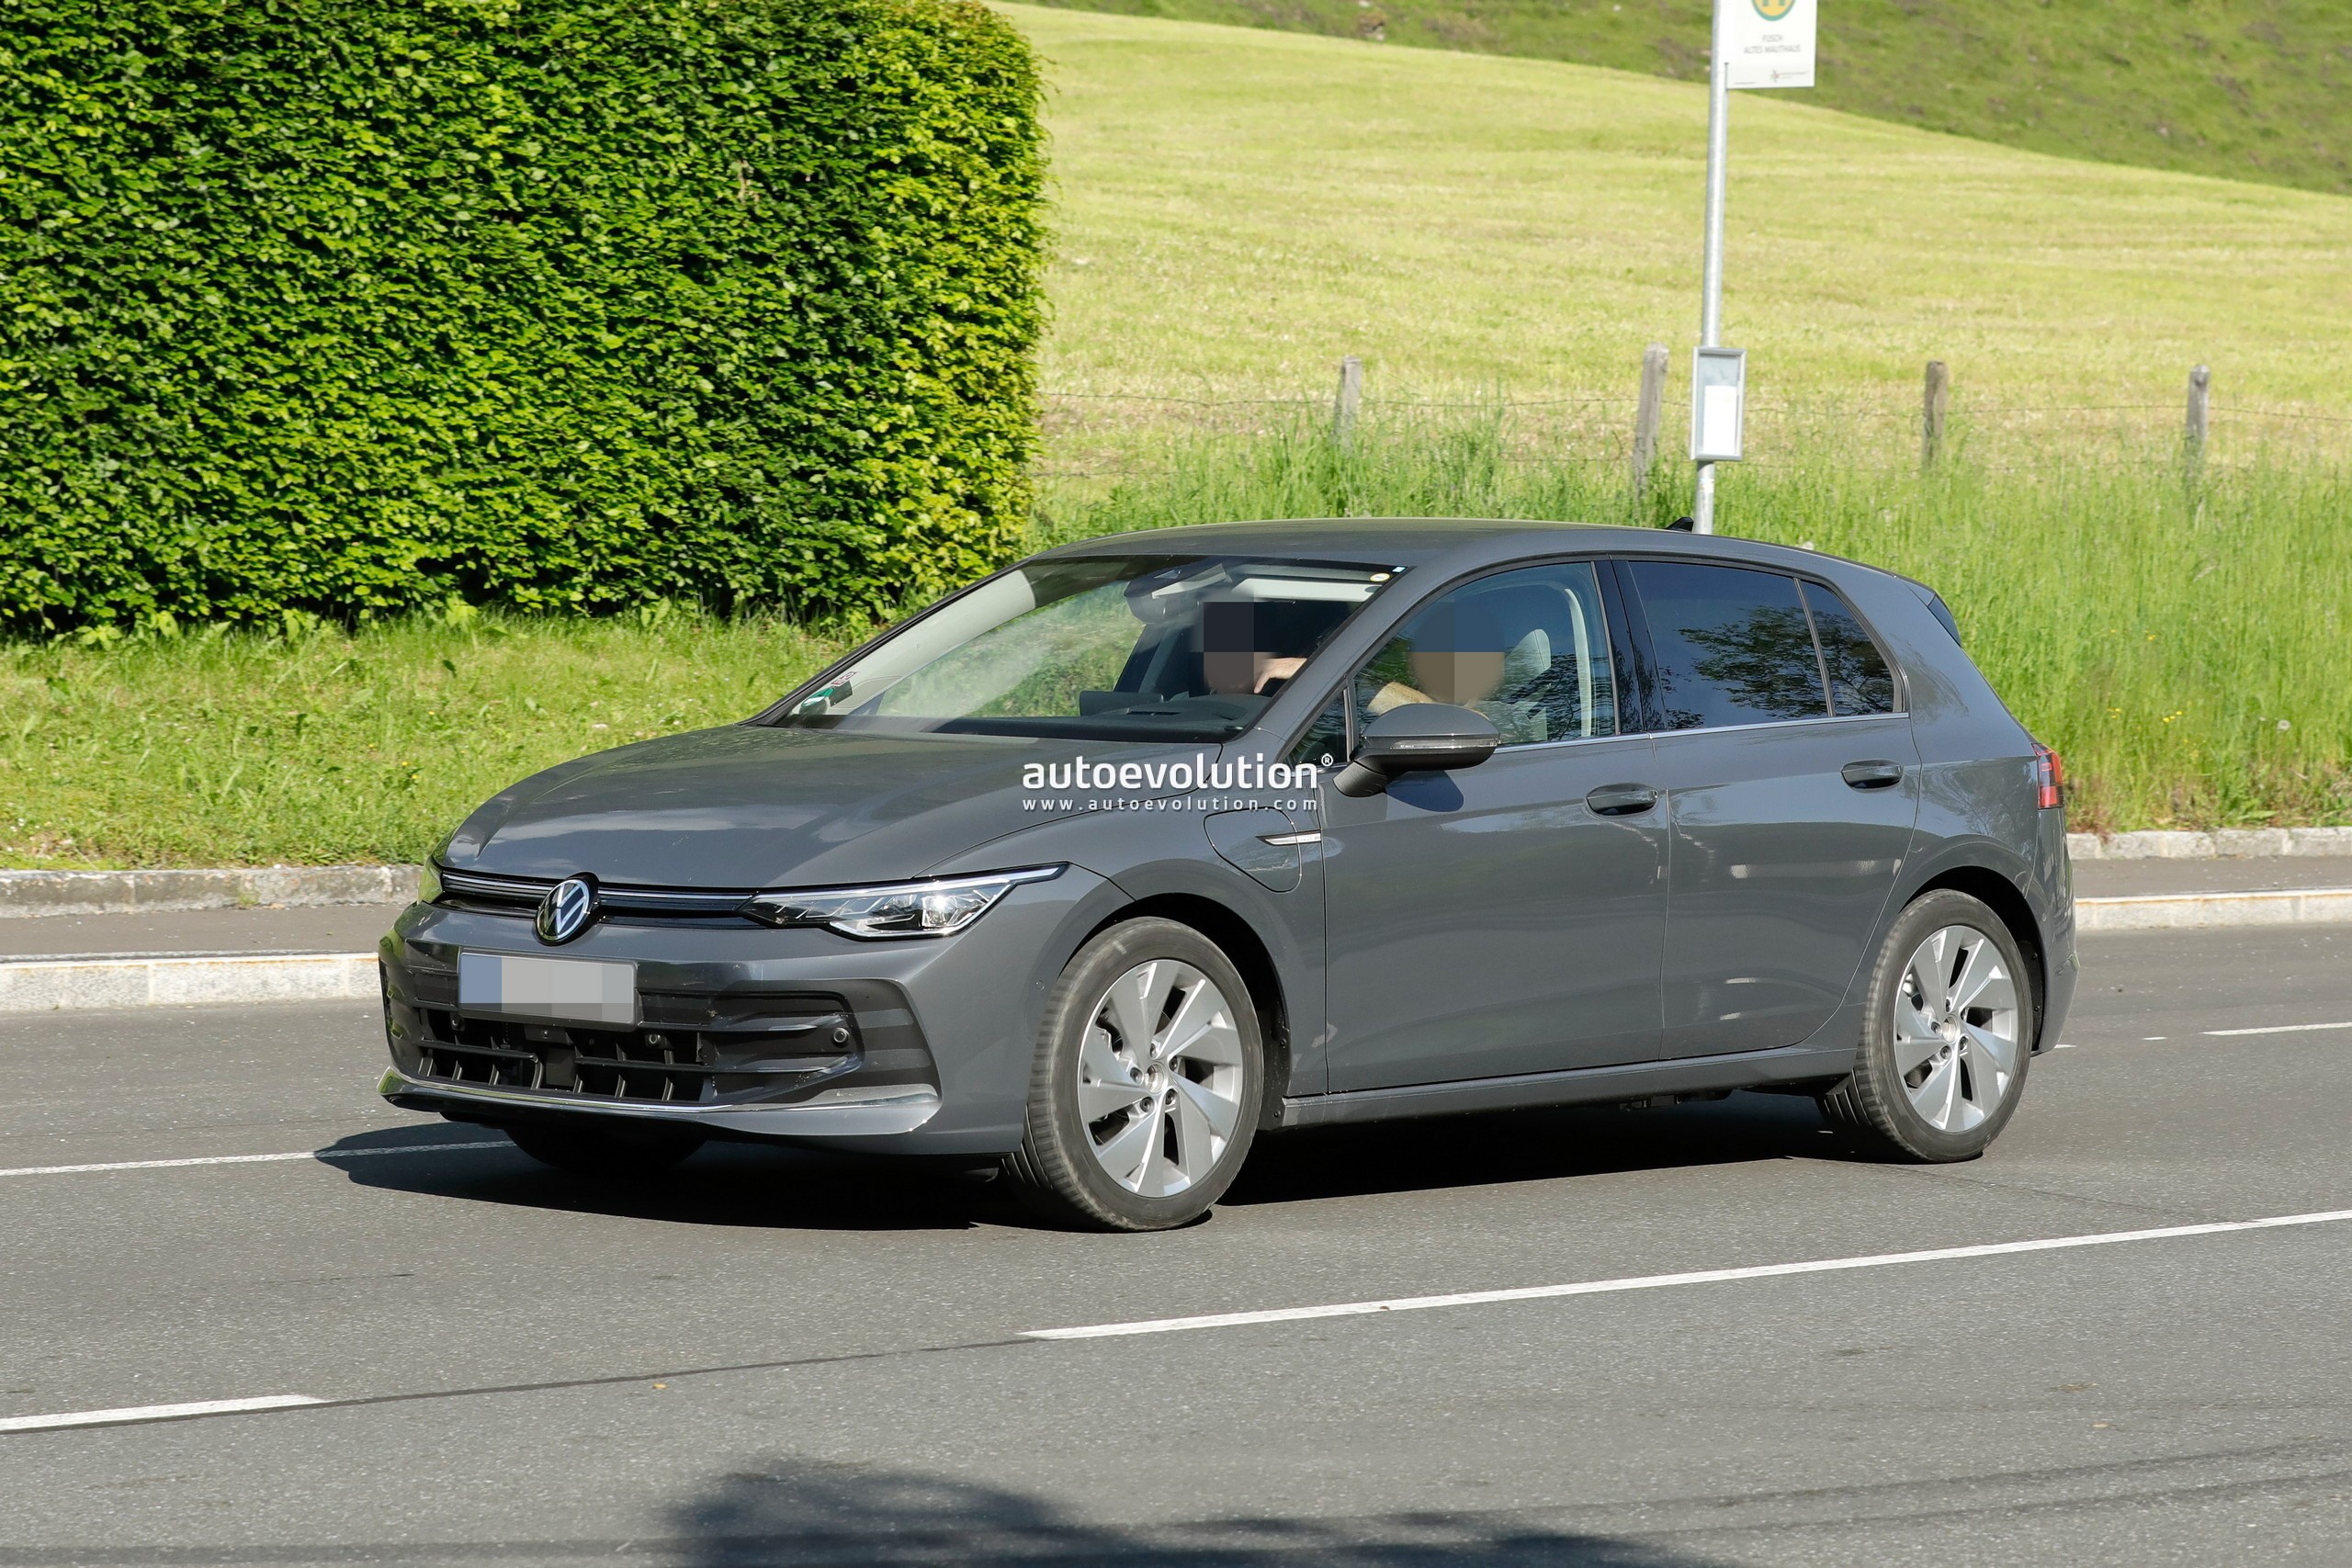 2024 VW Golf Caught Undisguised, Facelifted Hatch Shows Big